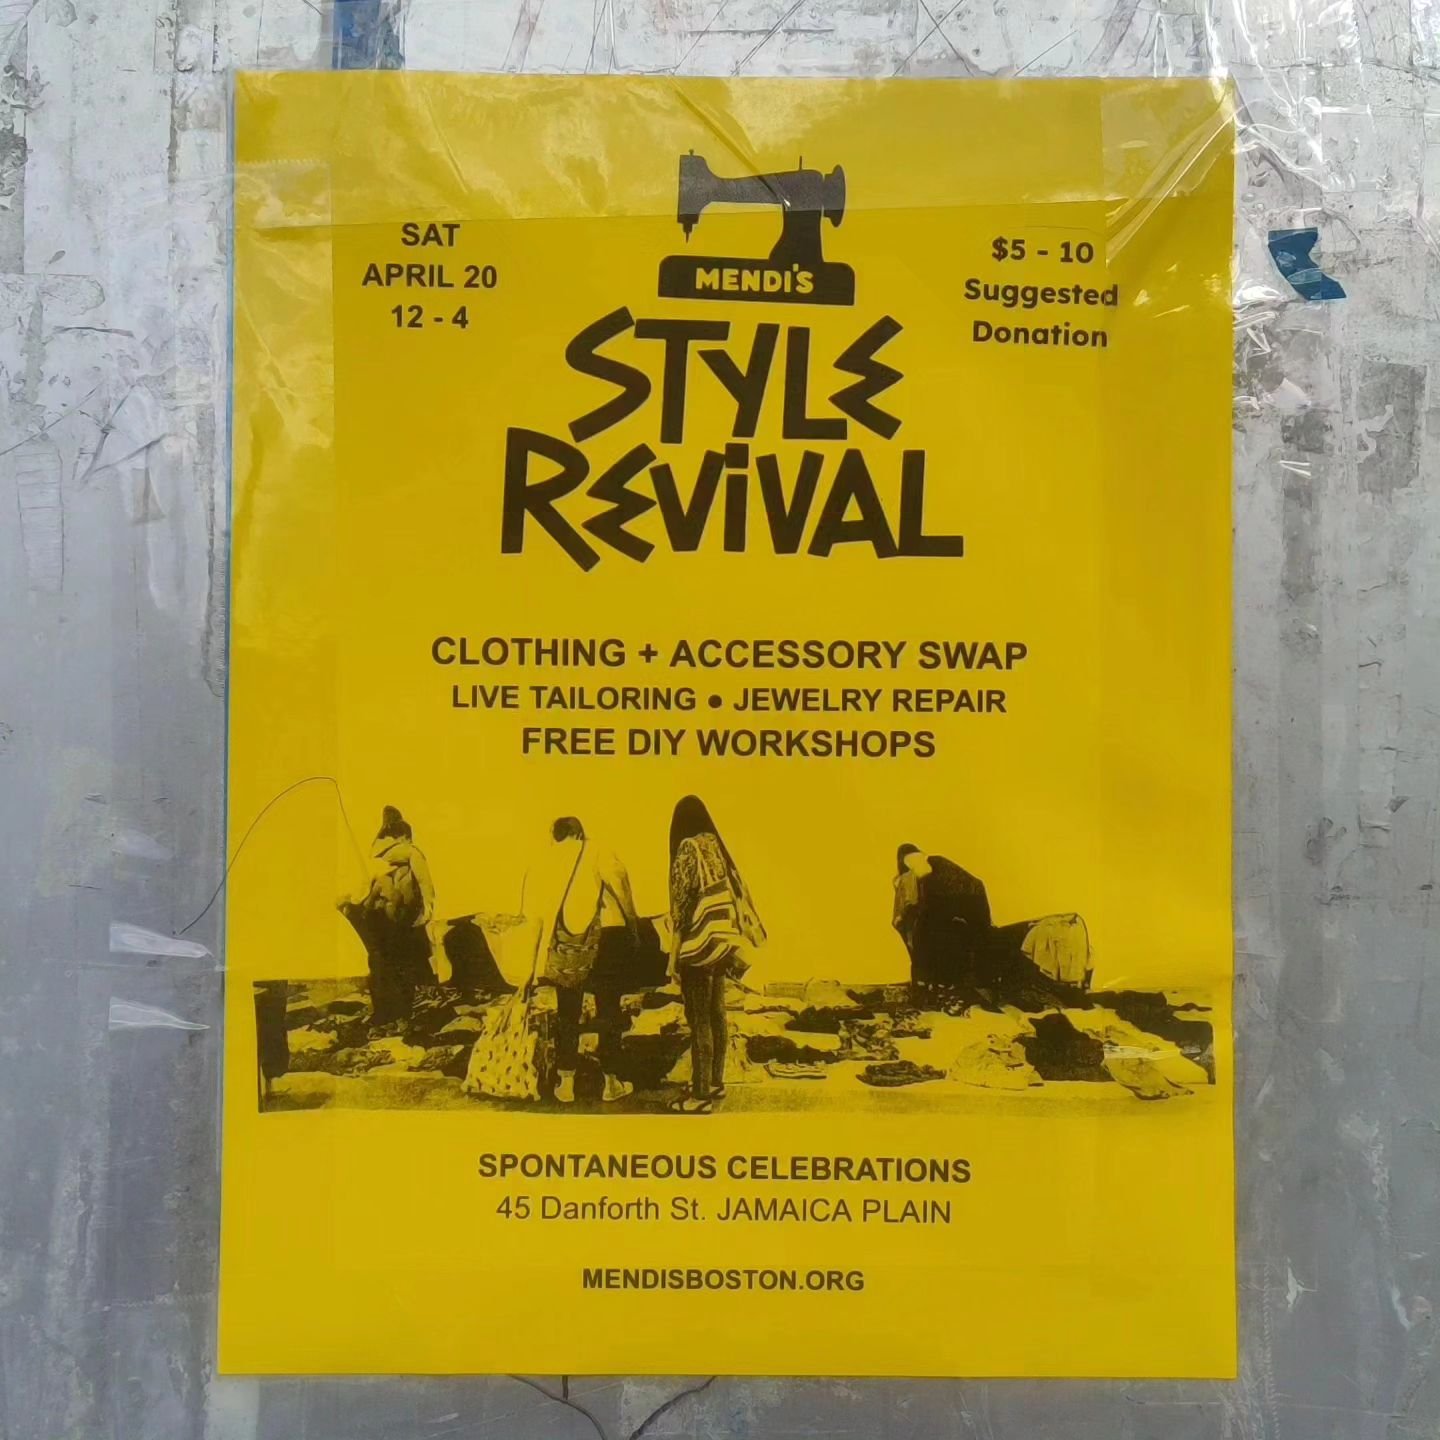 TODAY 12-4 @mendisboston #StyleRevival returns to Spontaneous! ♻️🪡🧵👖

SWAP. REPAIR. UPCYCLE. RECYCLE.

🔲STYLE REVIVAL 12 - 4 PM🔲
&bull; Adult Clothing + Accessory Swap
&bull; Live tailoring
&bull; Textile, shoe + bag recycling

🔲WORKSHOPS🔲

12